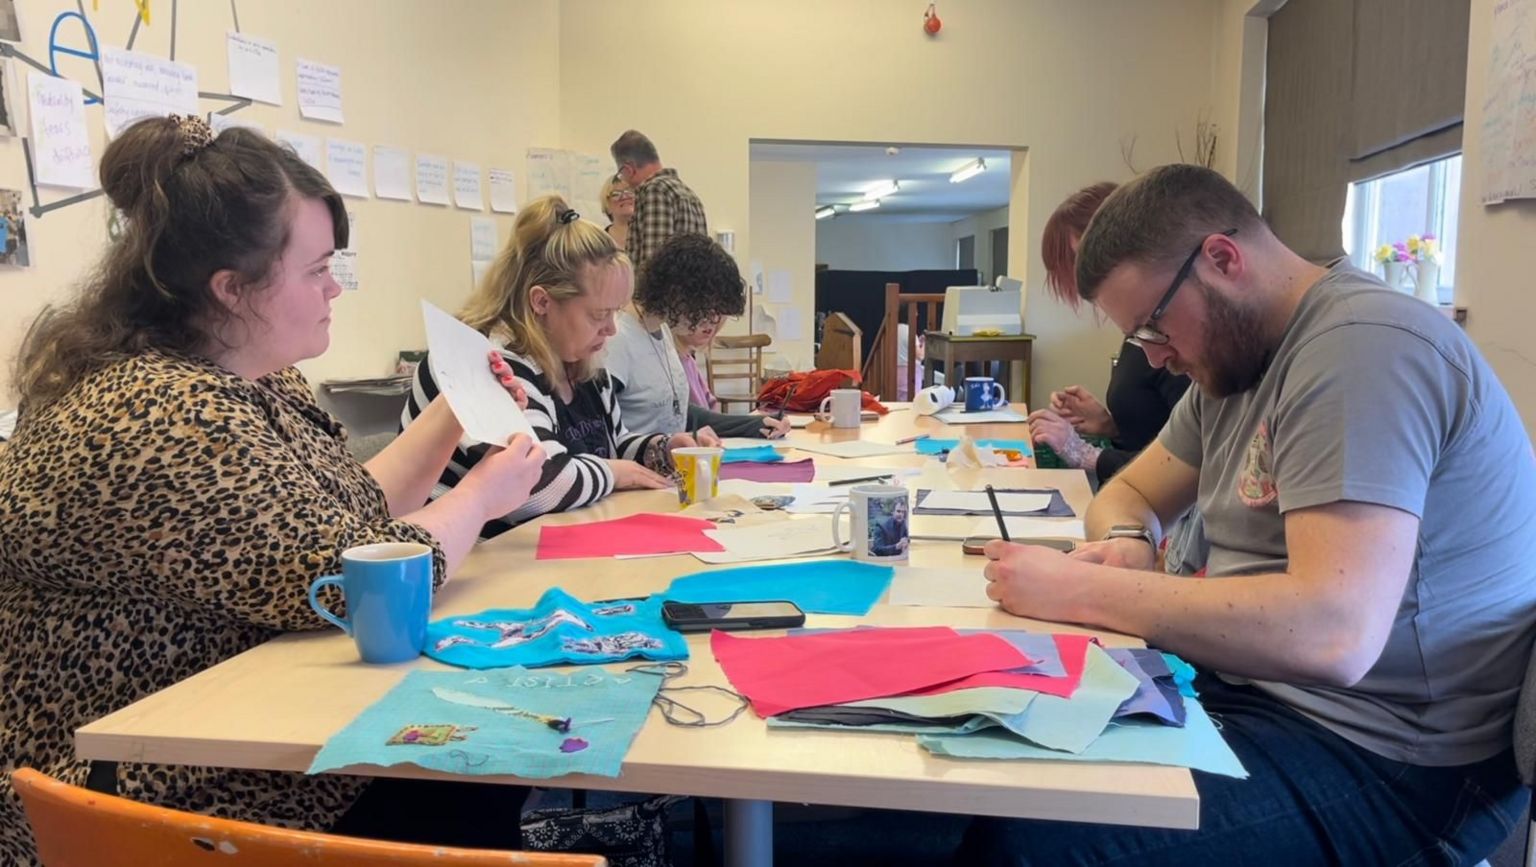 The Social Agency members designing their individual textile squares for the banner